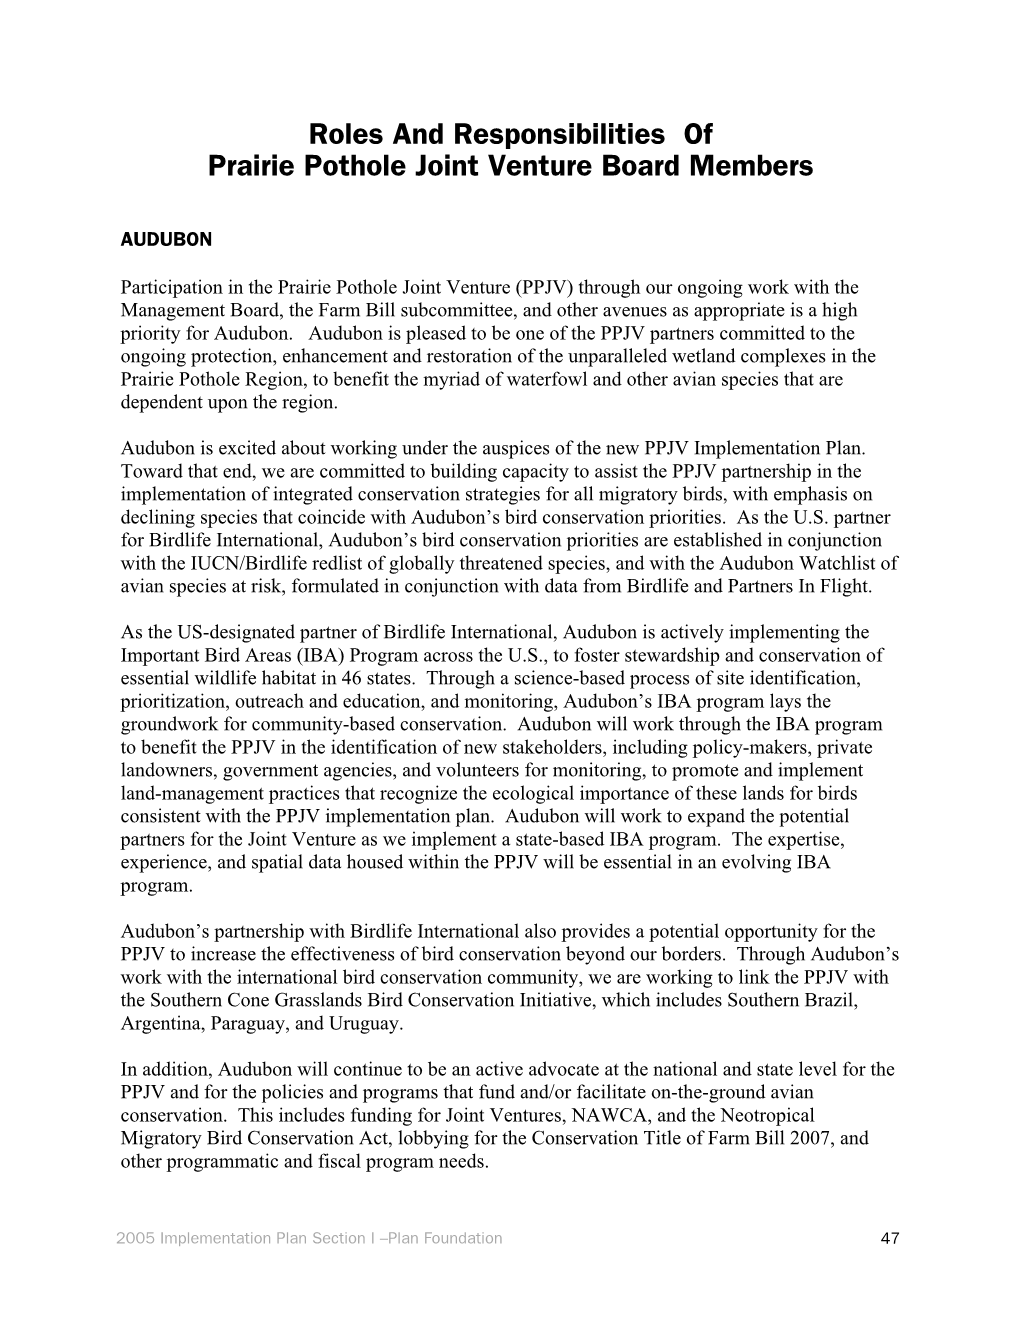 Roles and Responsibilities of PPJV